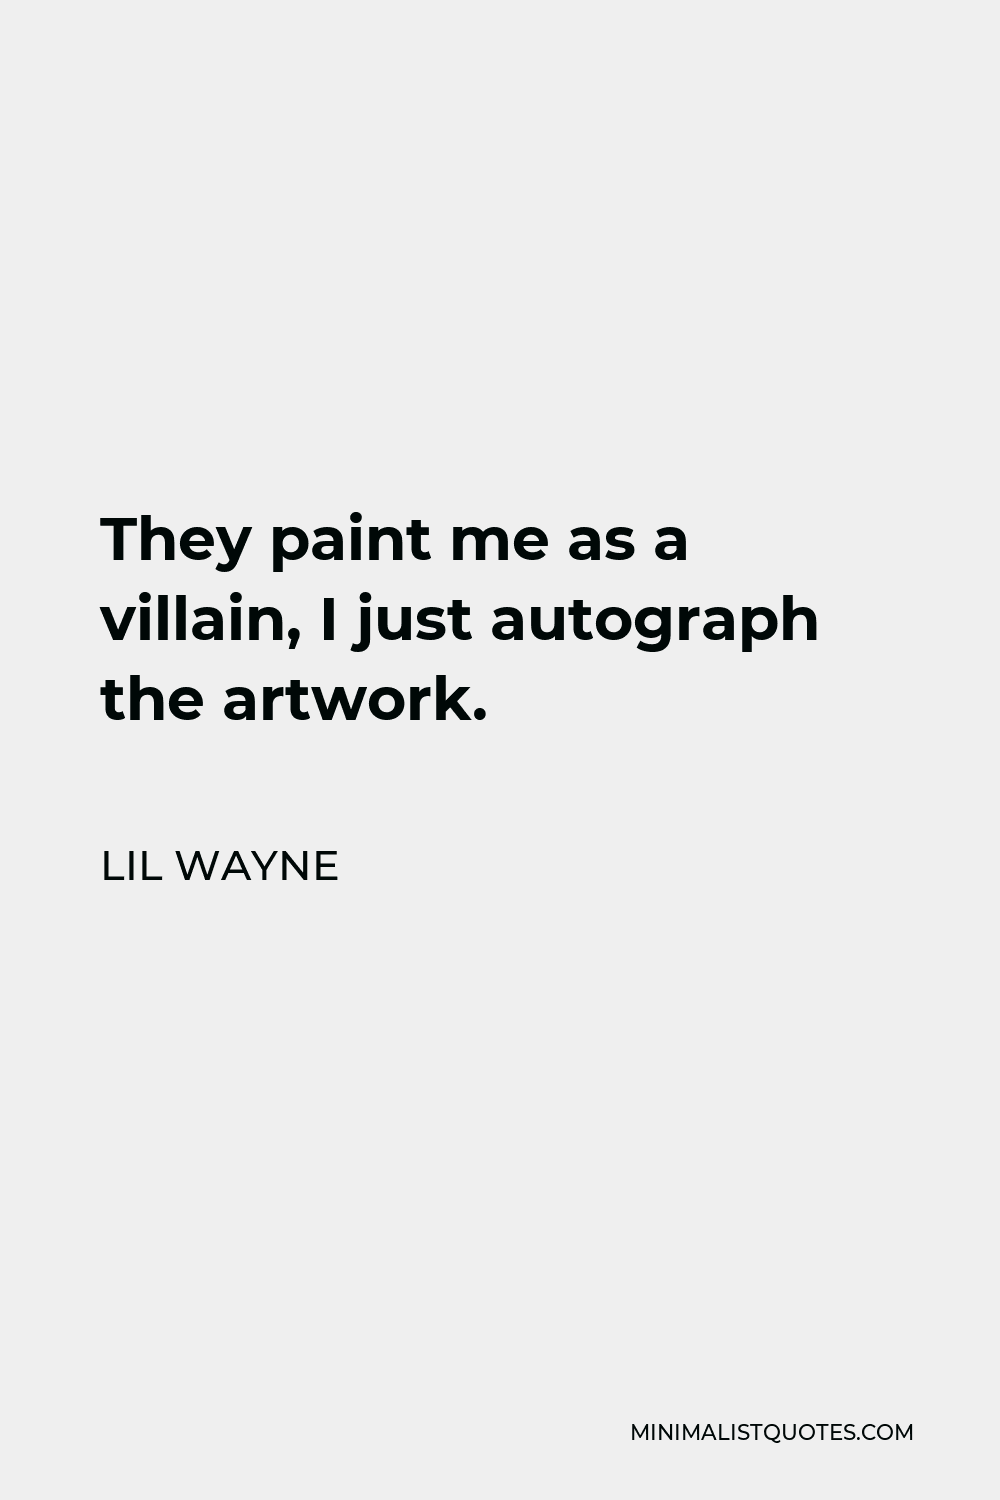 Lil Wayne Quote - They paint me as a villain, I just autograph the artwork.